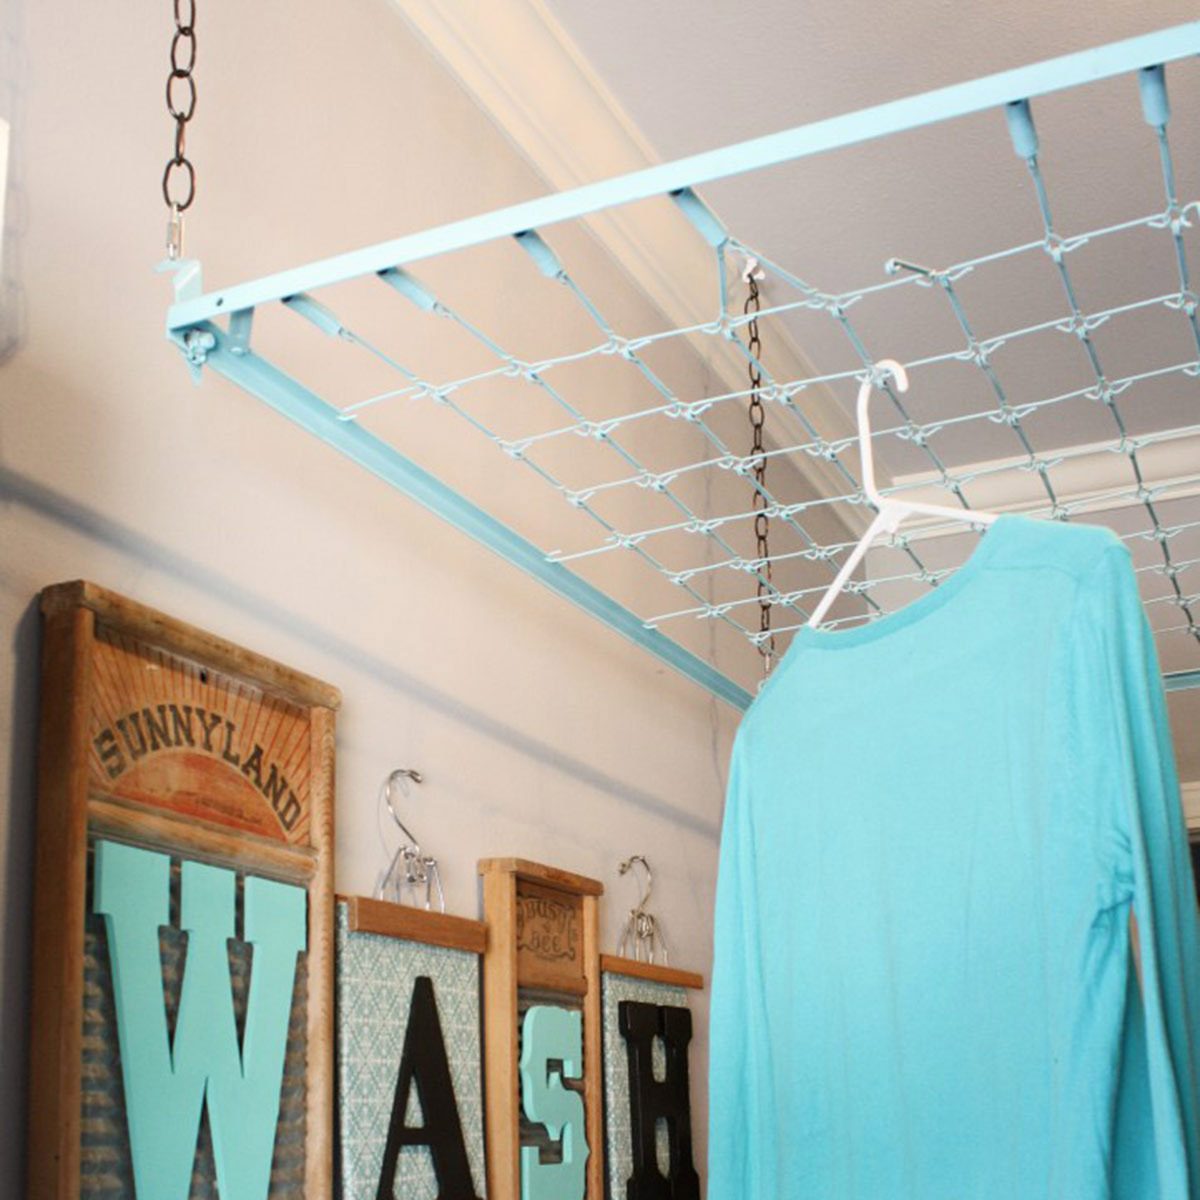 How to Dry Clothes Without a Dryer | The Family Handyman